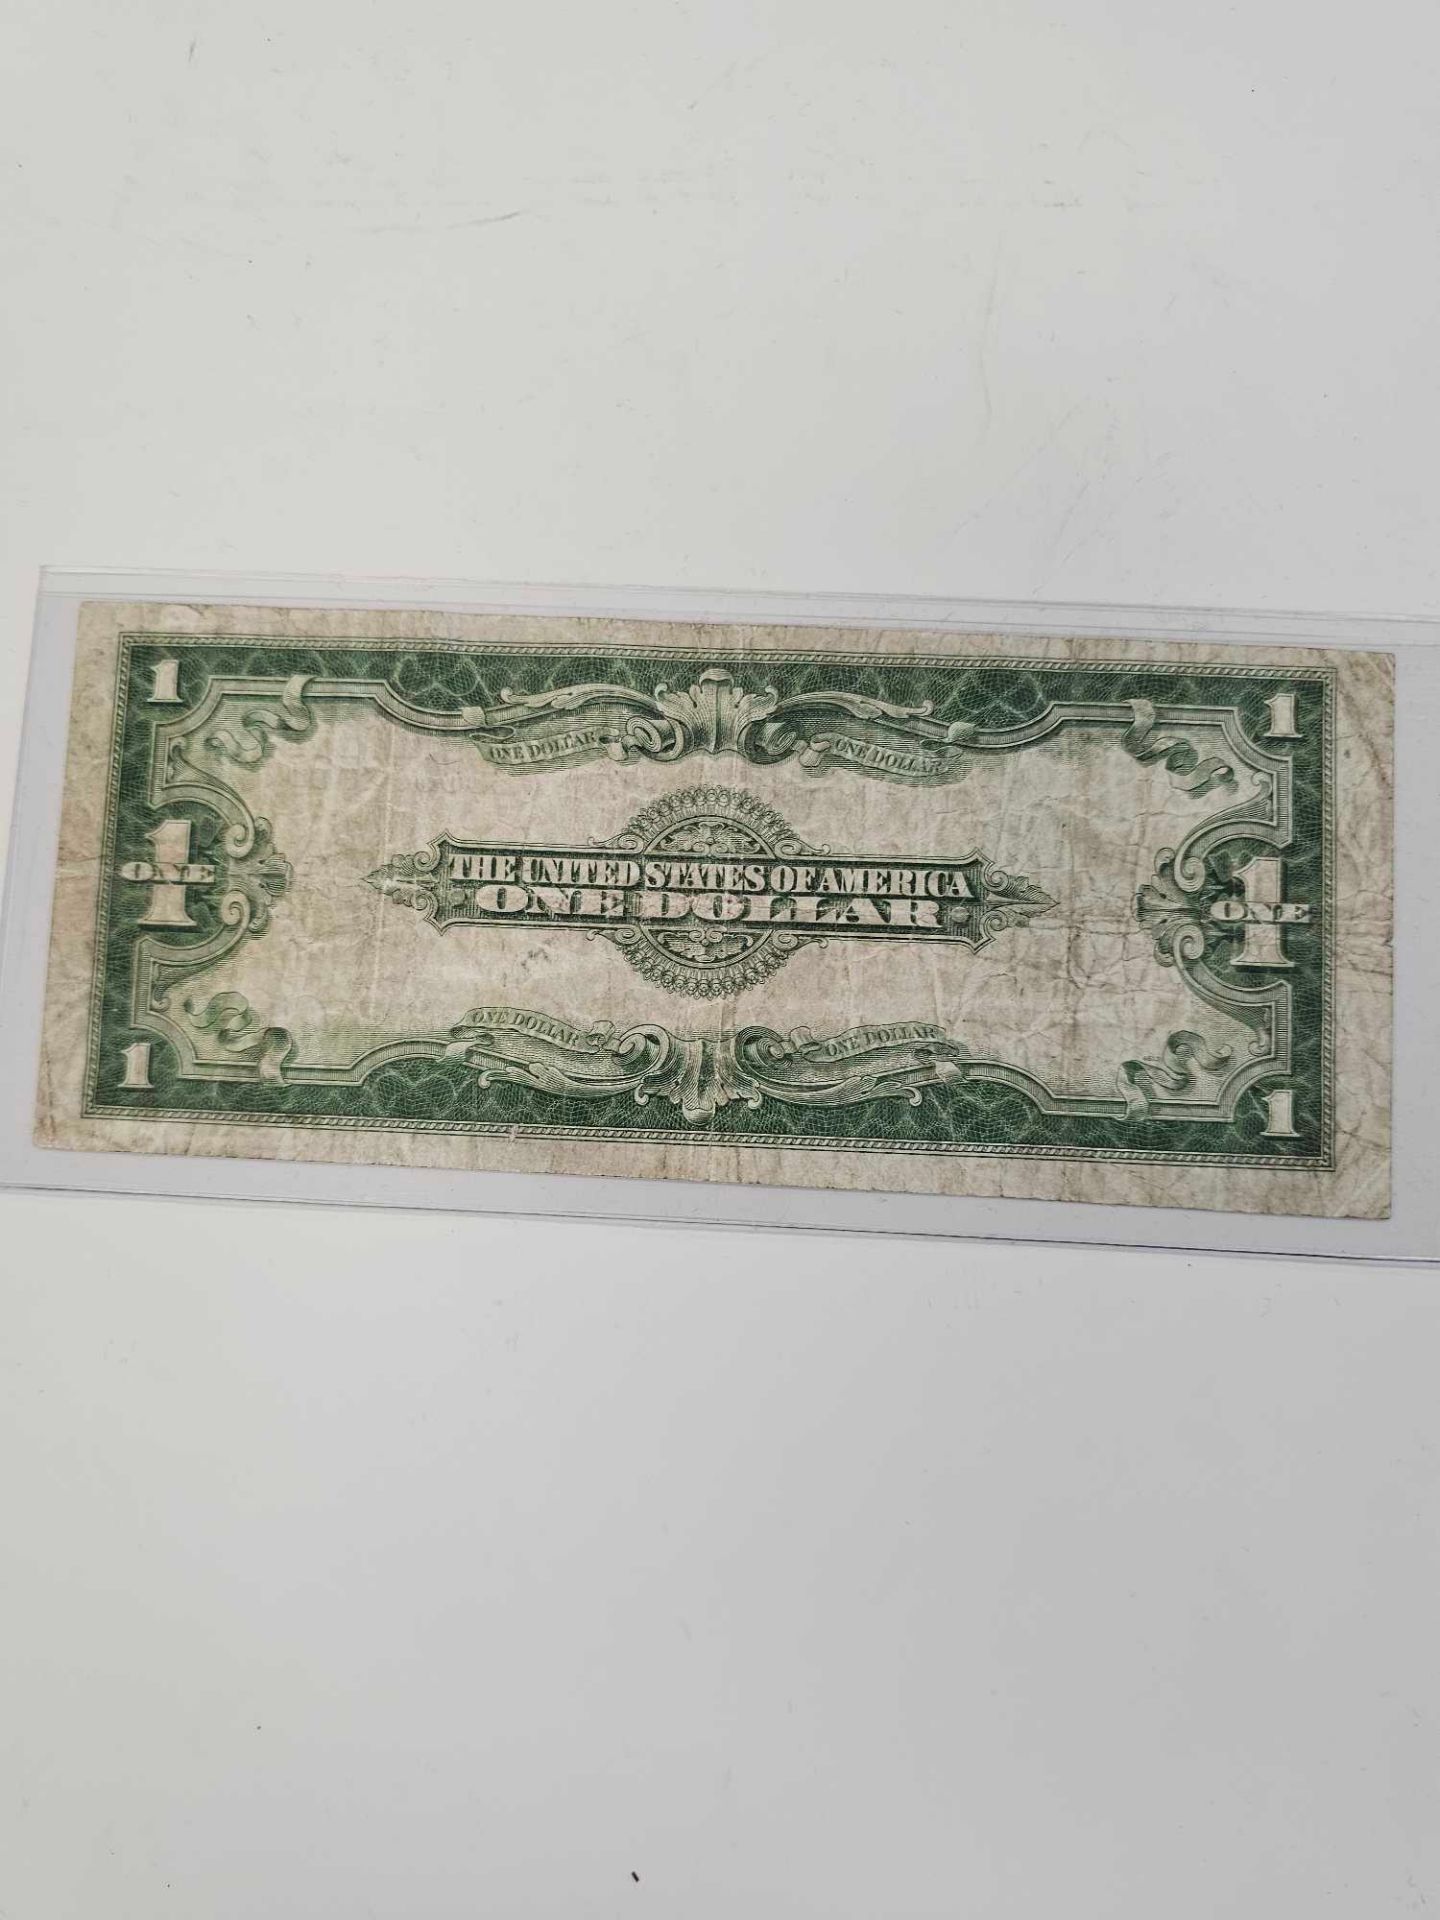 1923 Large $1 Silver Certificate horse blanket note - Image 2 of 5